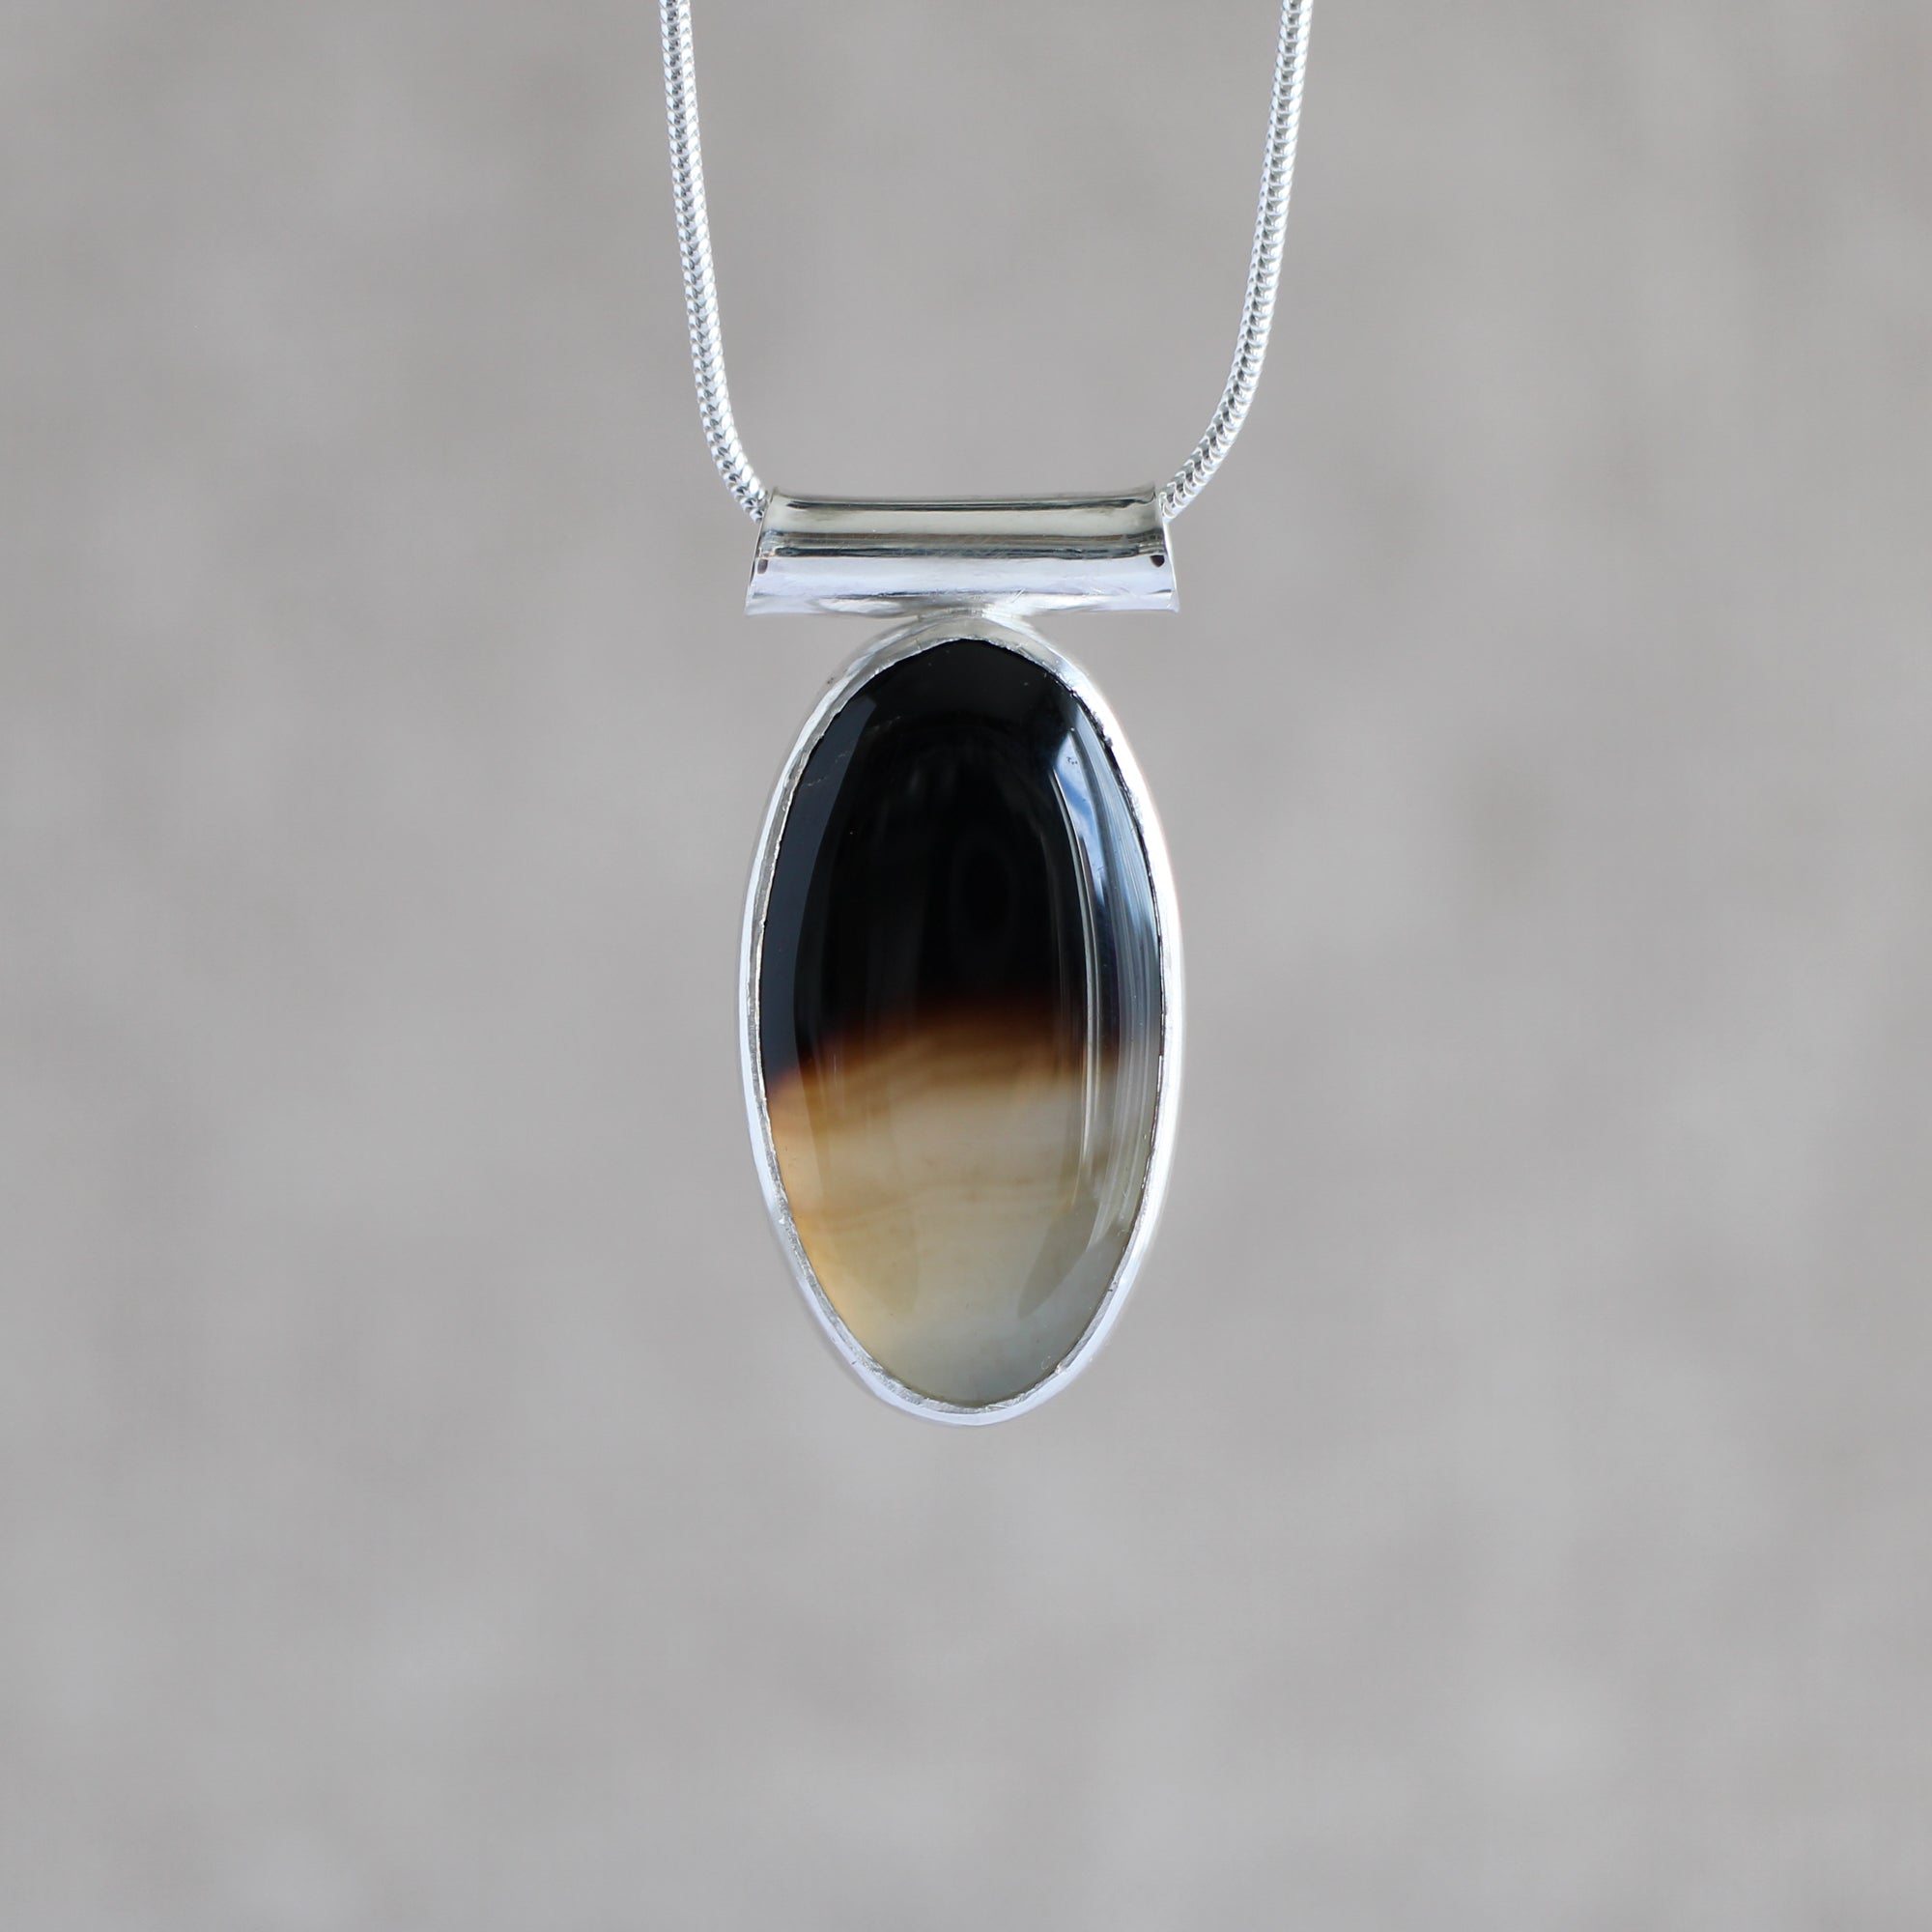 Agate set in sterling silver by Aimi Cairns Jewellery, Limited edition jewellery